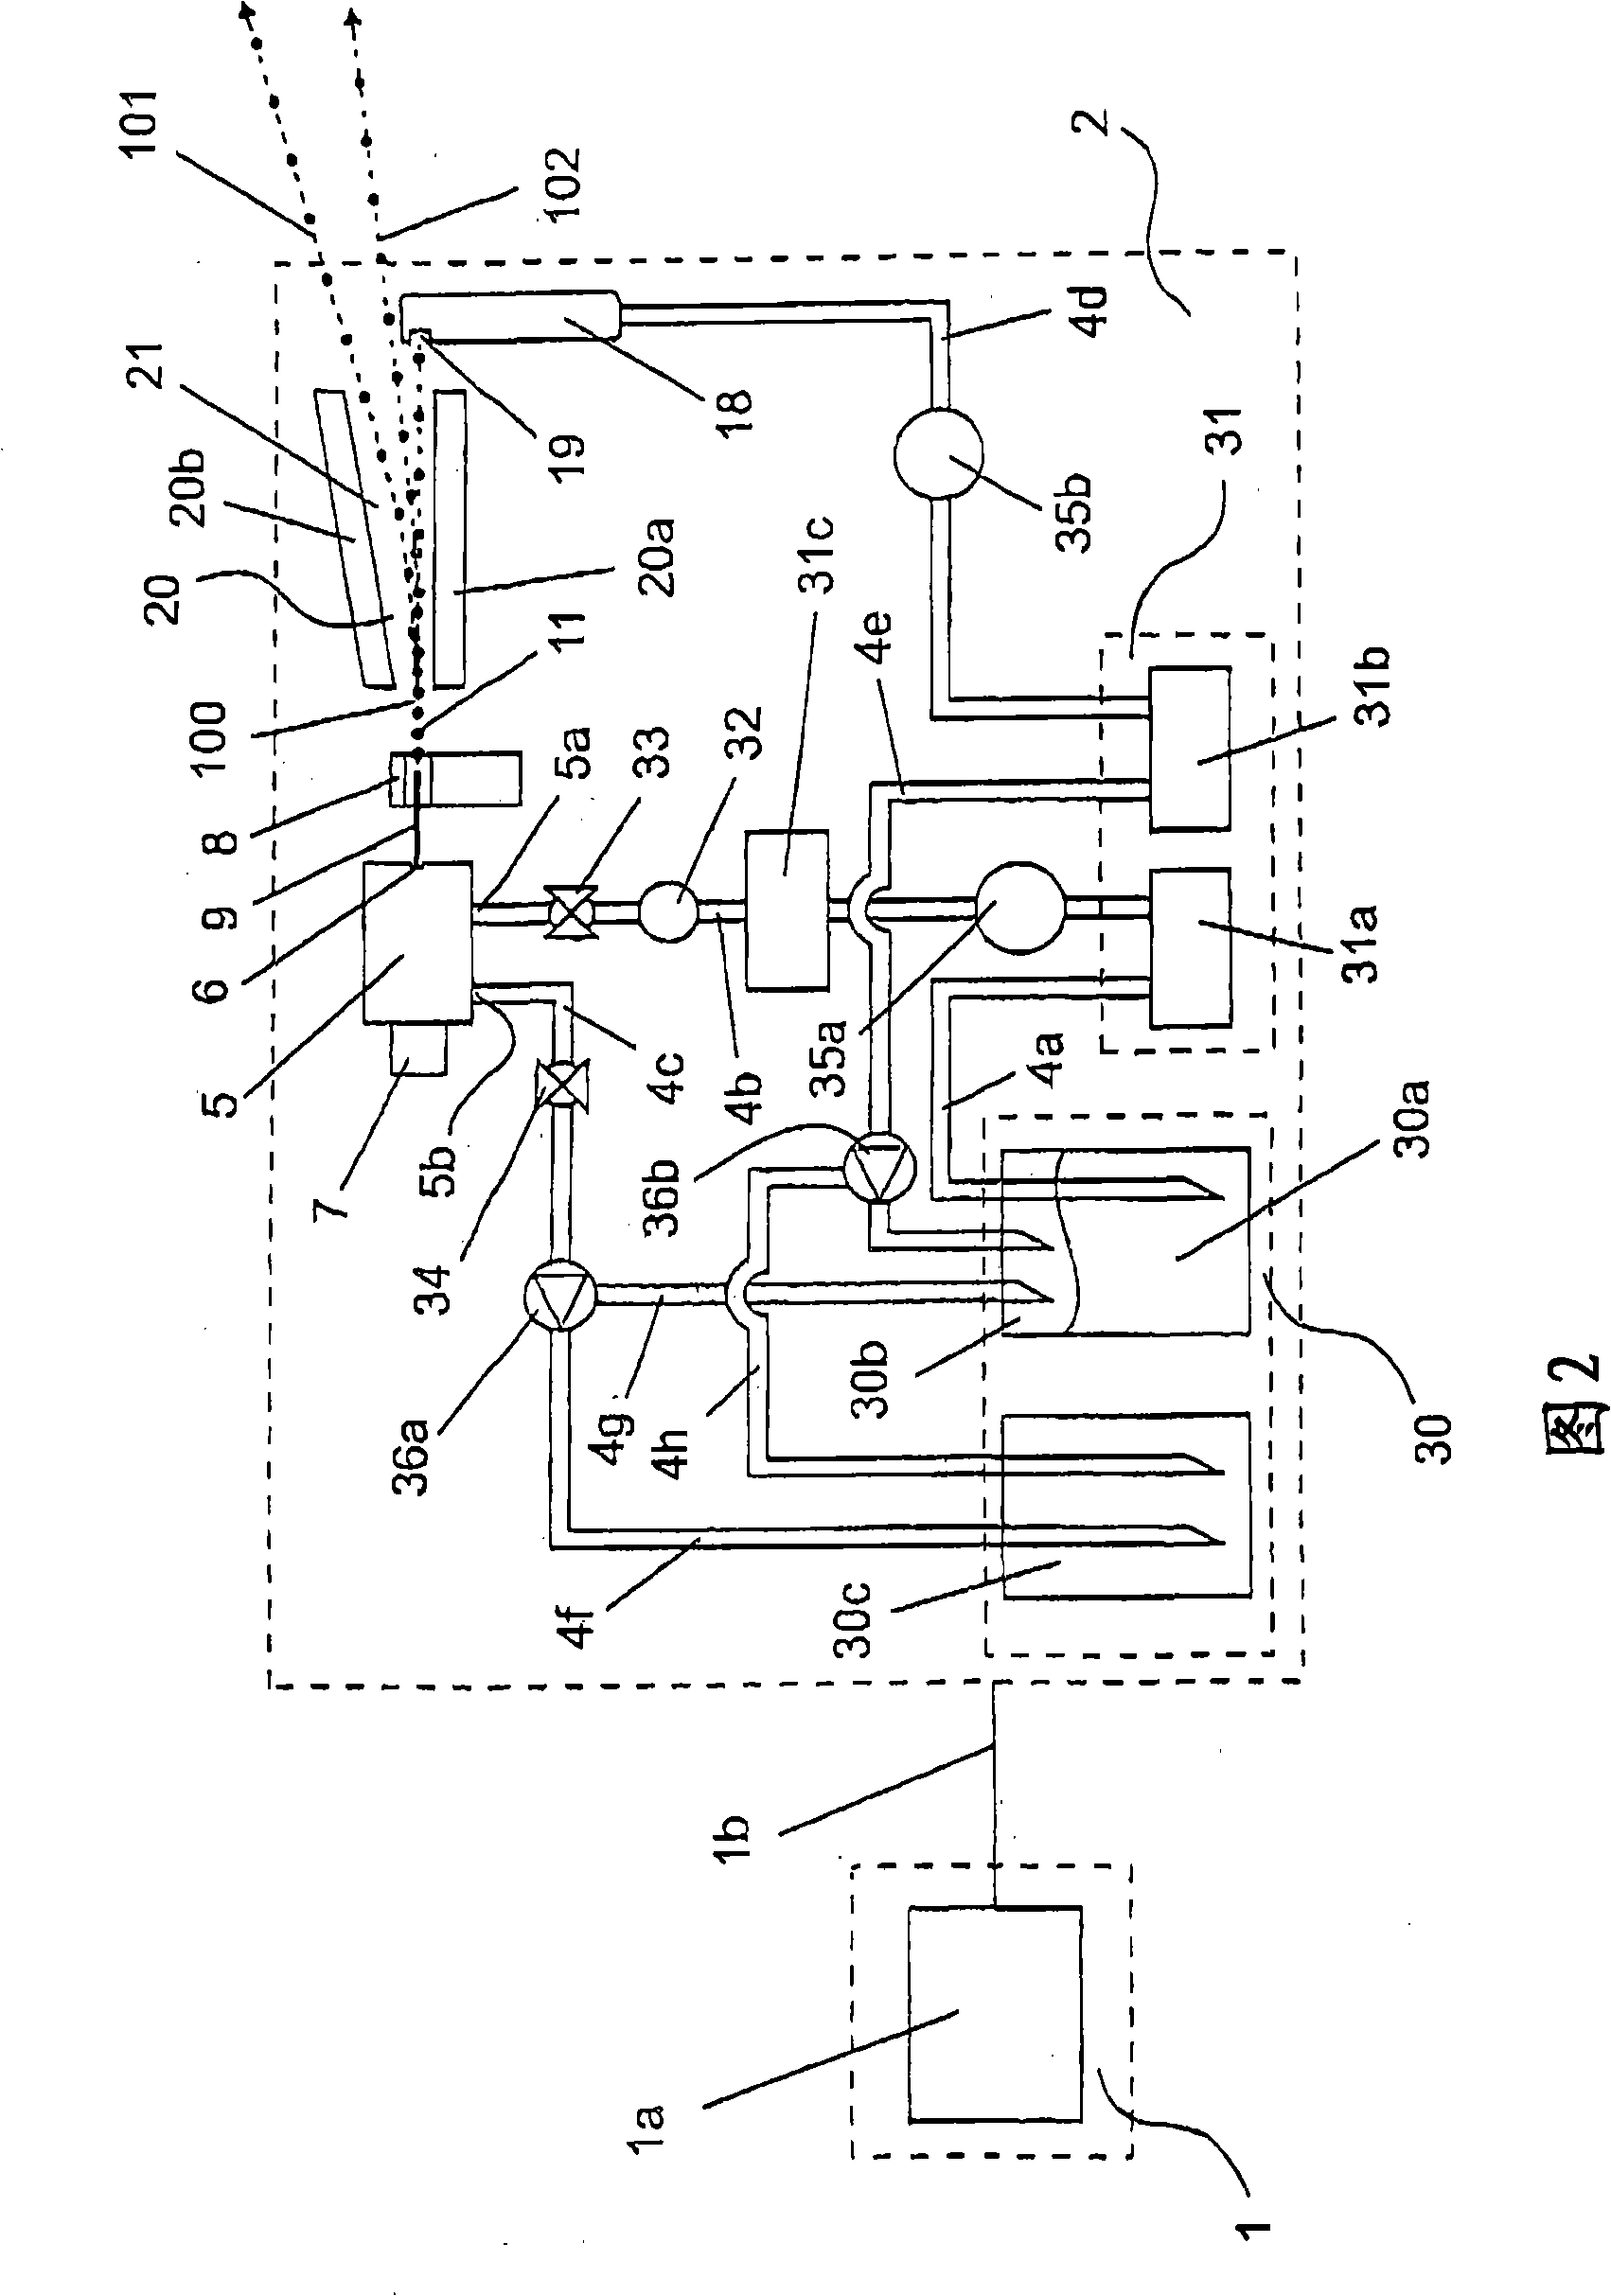 Method and system for metering and applying a reagent liquid